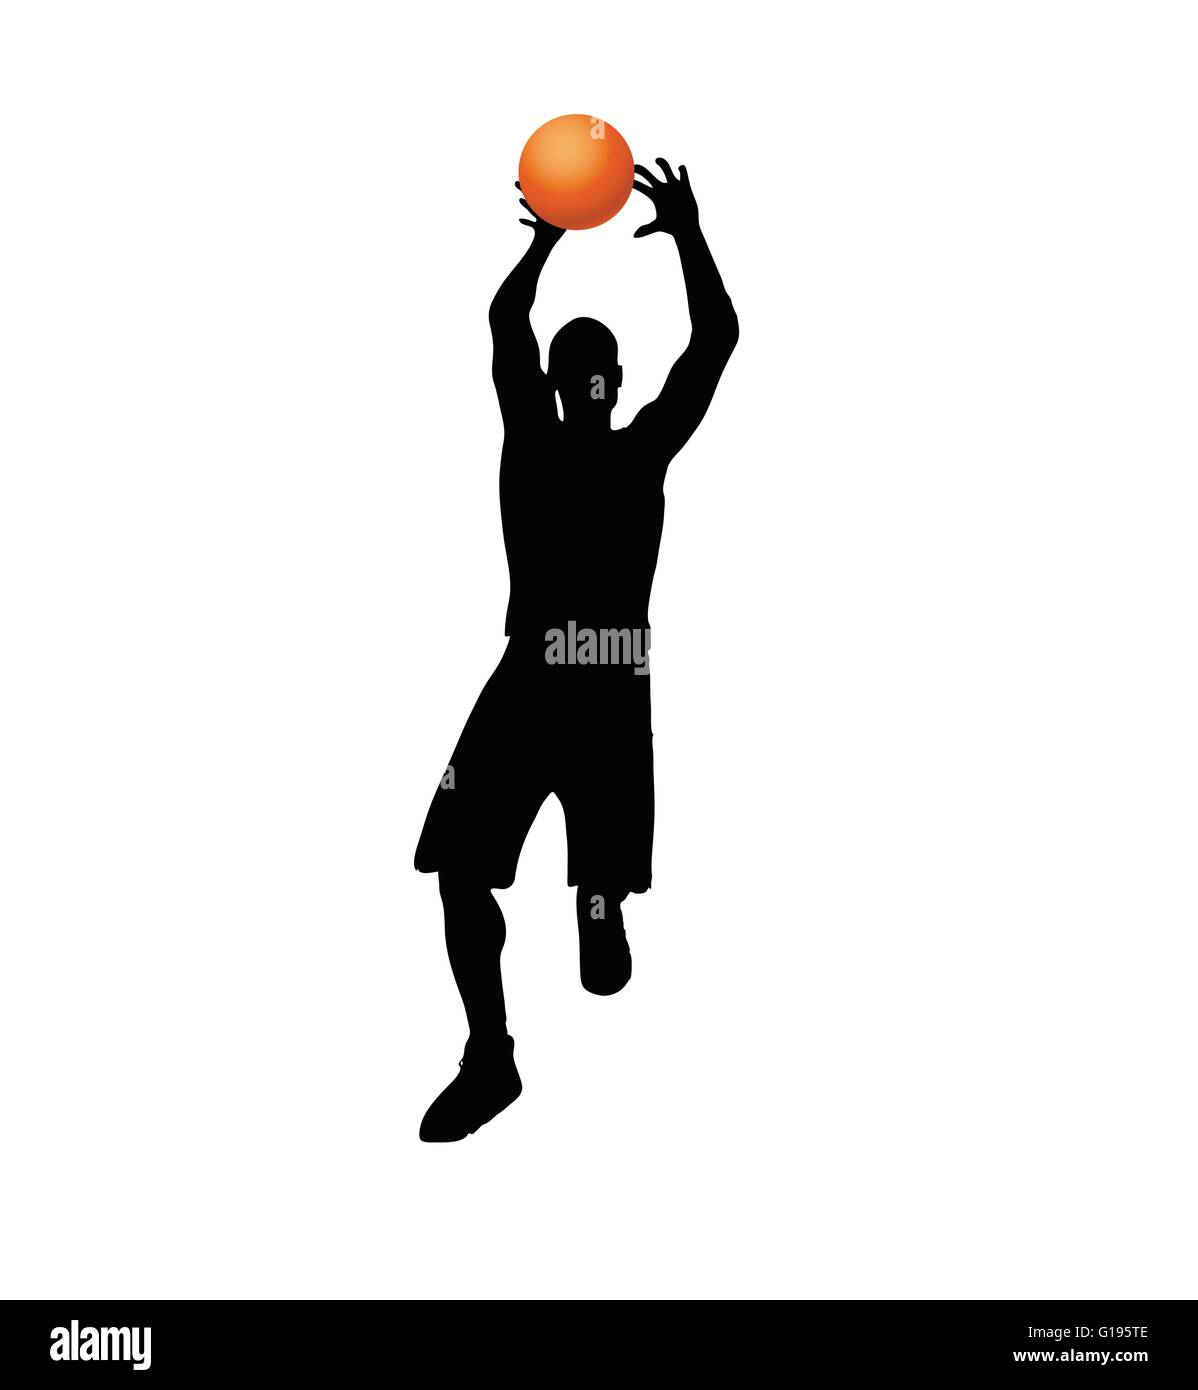 Vector Image - basketball player man silhouette isolated on white ...